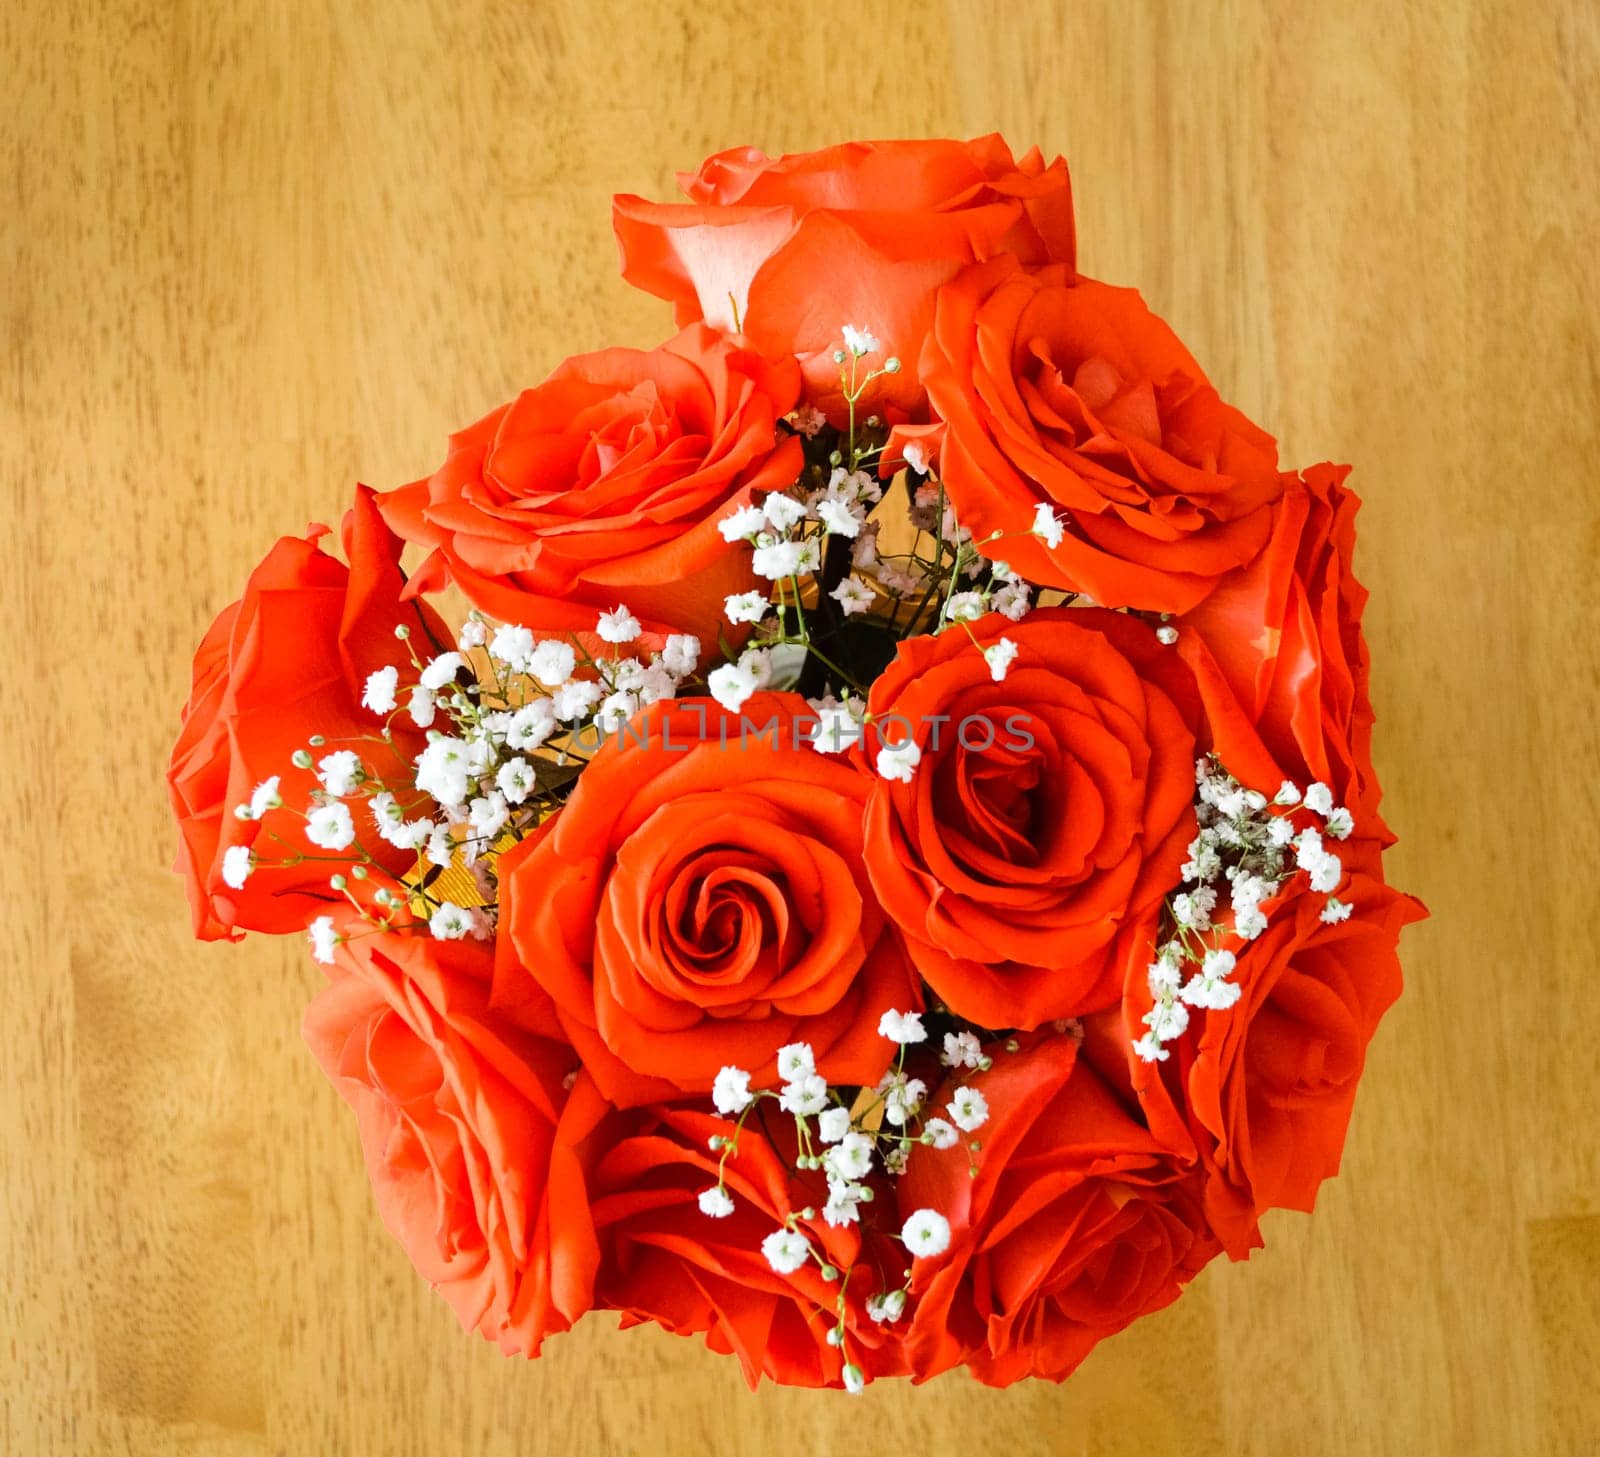 Beautiful bouquet of red roses on a wooden table.